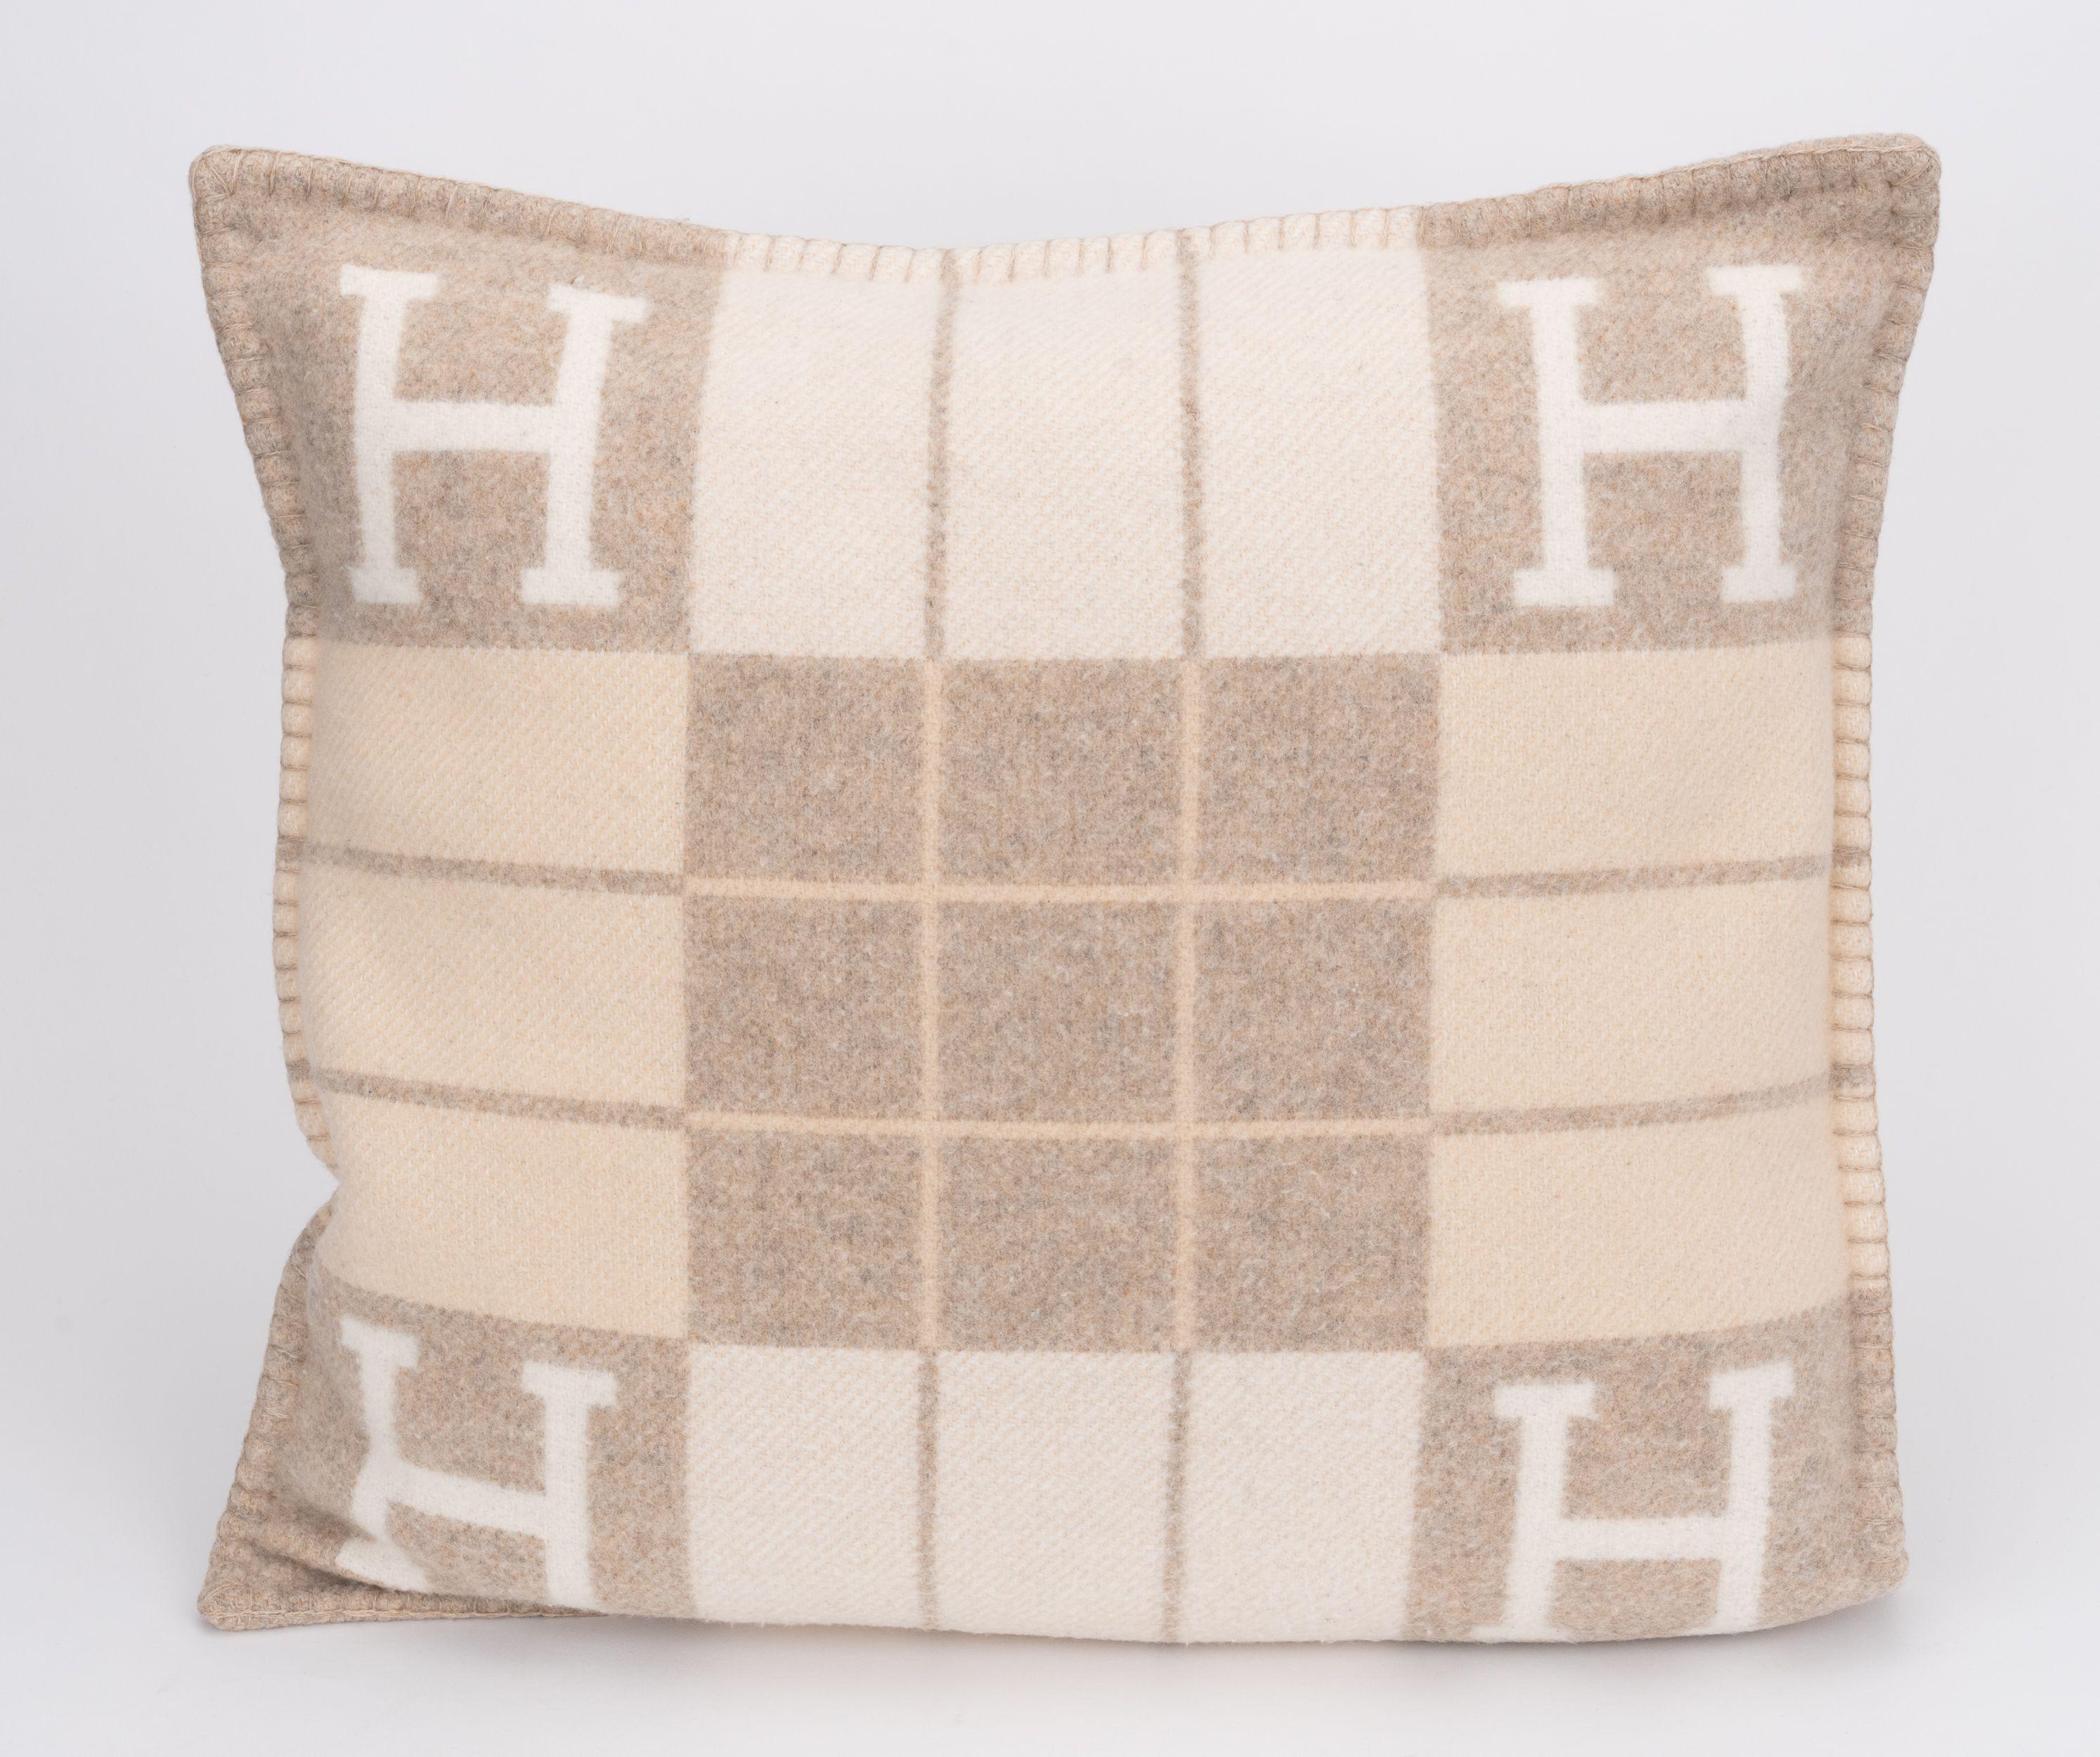 Hermès Avalon III pillow in cream and beige color way. Minimum wear, recently dry cleaned professionally. 2 units available. 90% wool, 10% cashmere.